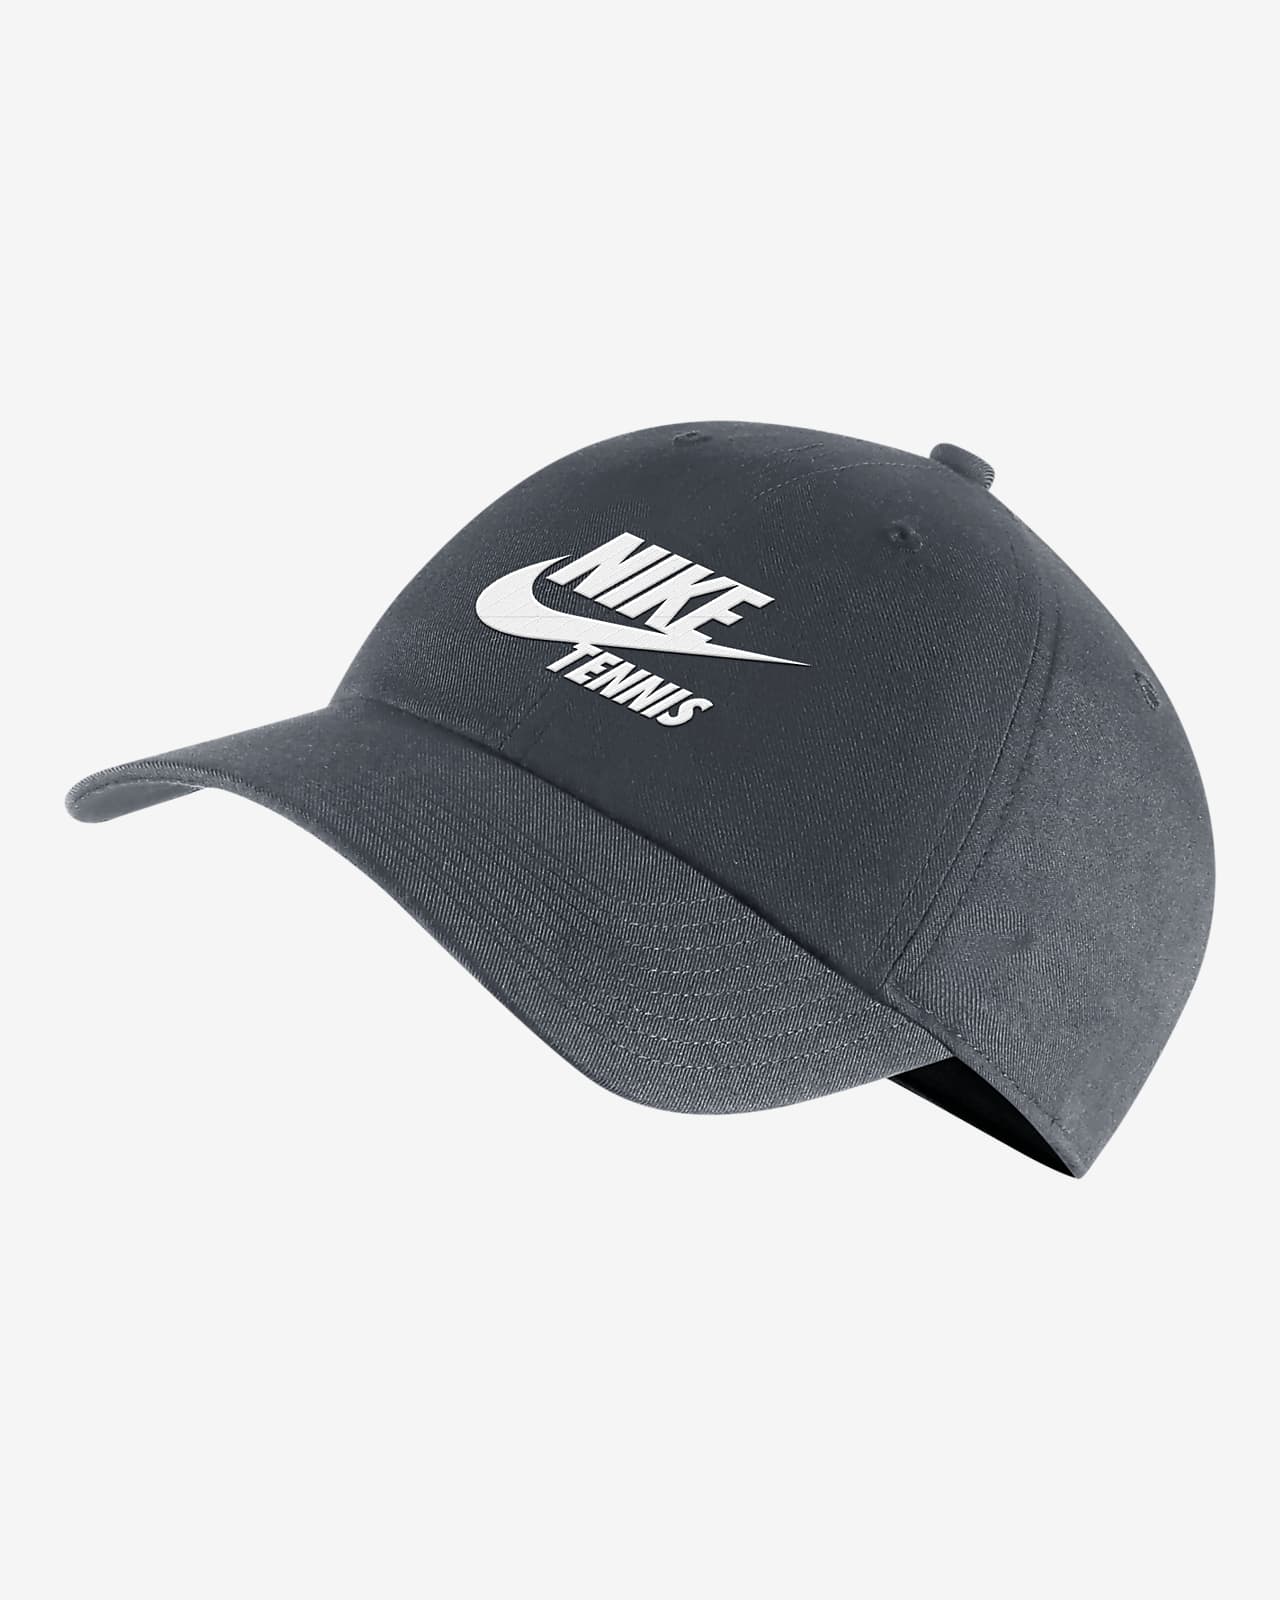 Nike H86 Have A Nike Day cap in blue